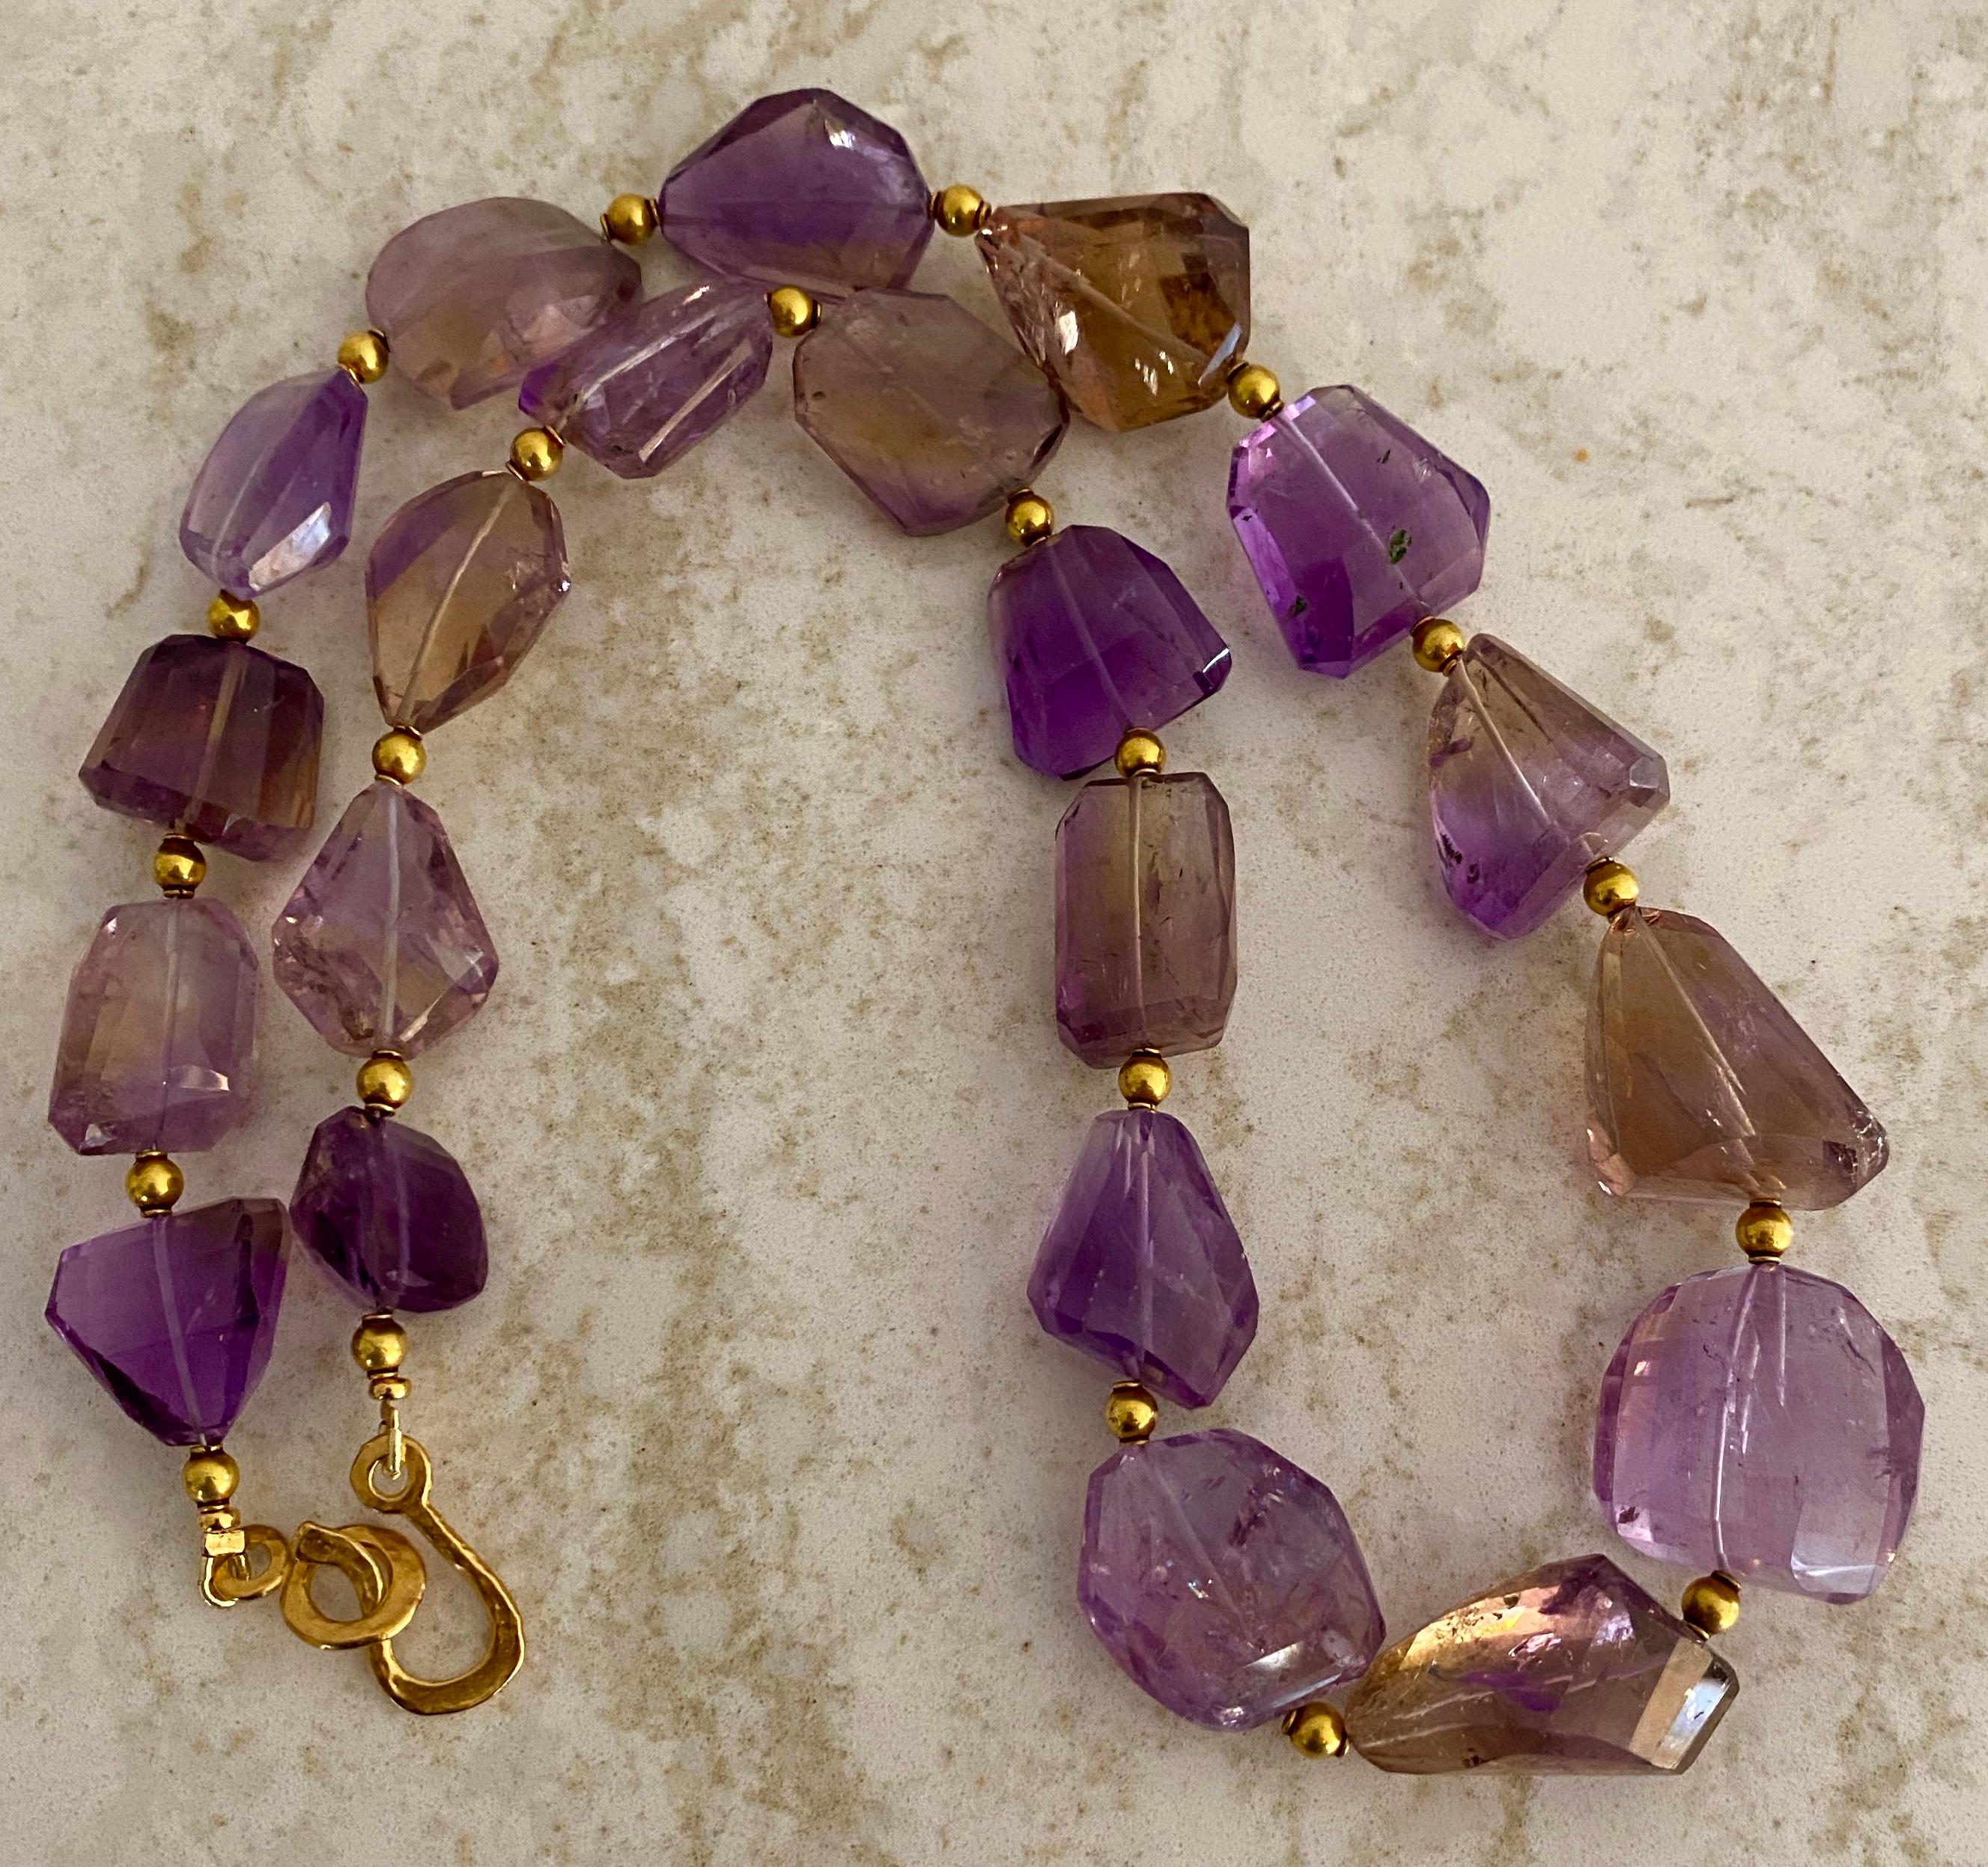 Ametrine beads in luscious lavender and gold shades are presented in this impressive necklace.  Ametrine (origin: Bolivia) is a naturally occurring variety of quartz.  Each gem is a mixture of amethyst and citrine with zones of each color-thus the